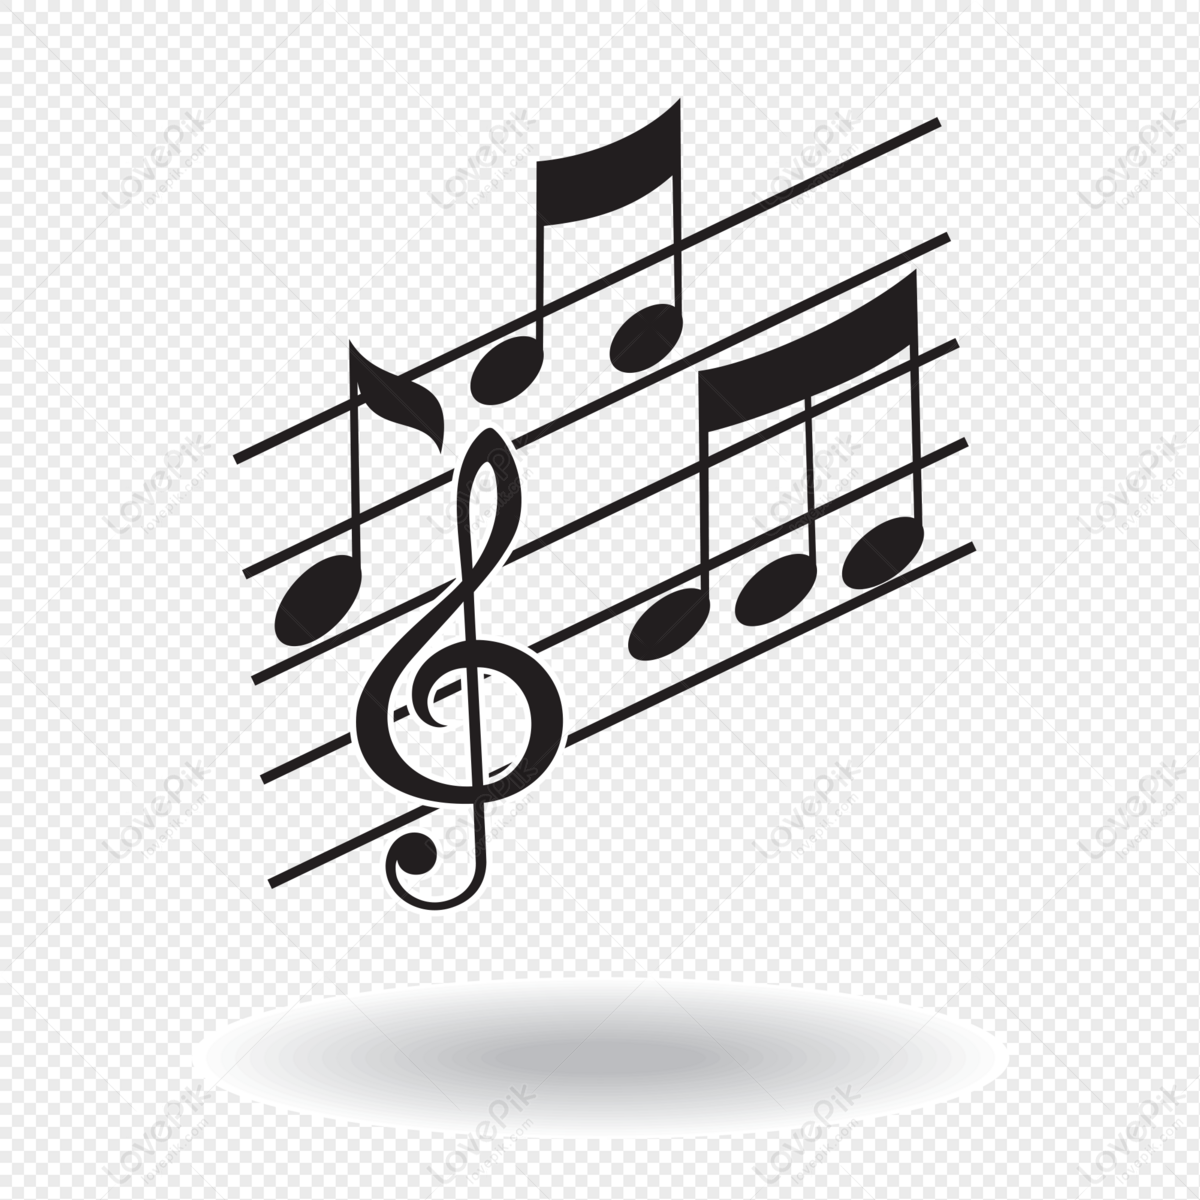 Music Note PNG Transparent Background And Clipart Image For Free Download -  Lovepik | 401568040